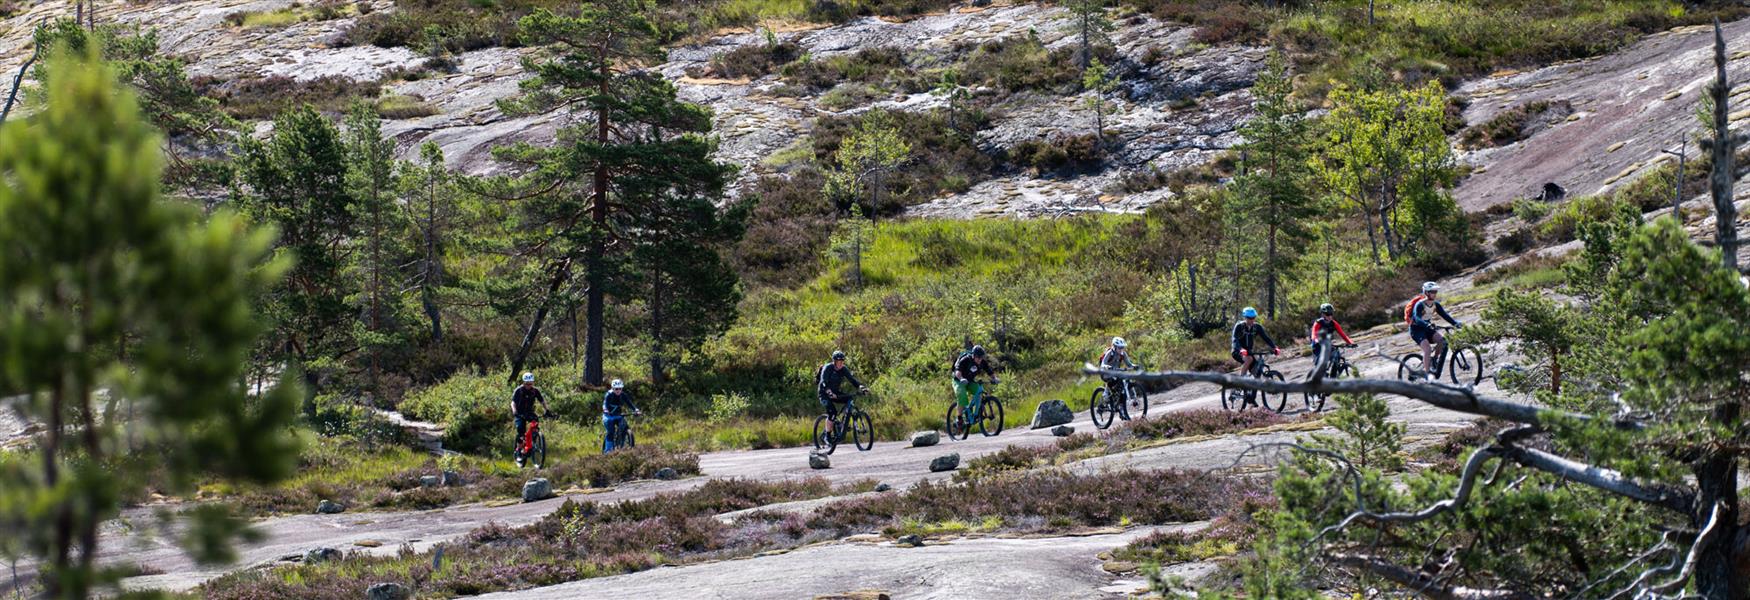 group of cyclists cycling over rocky cliffs in Nissedal